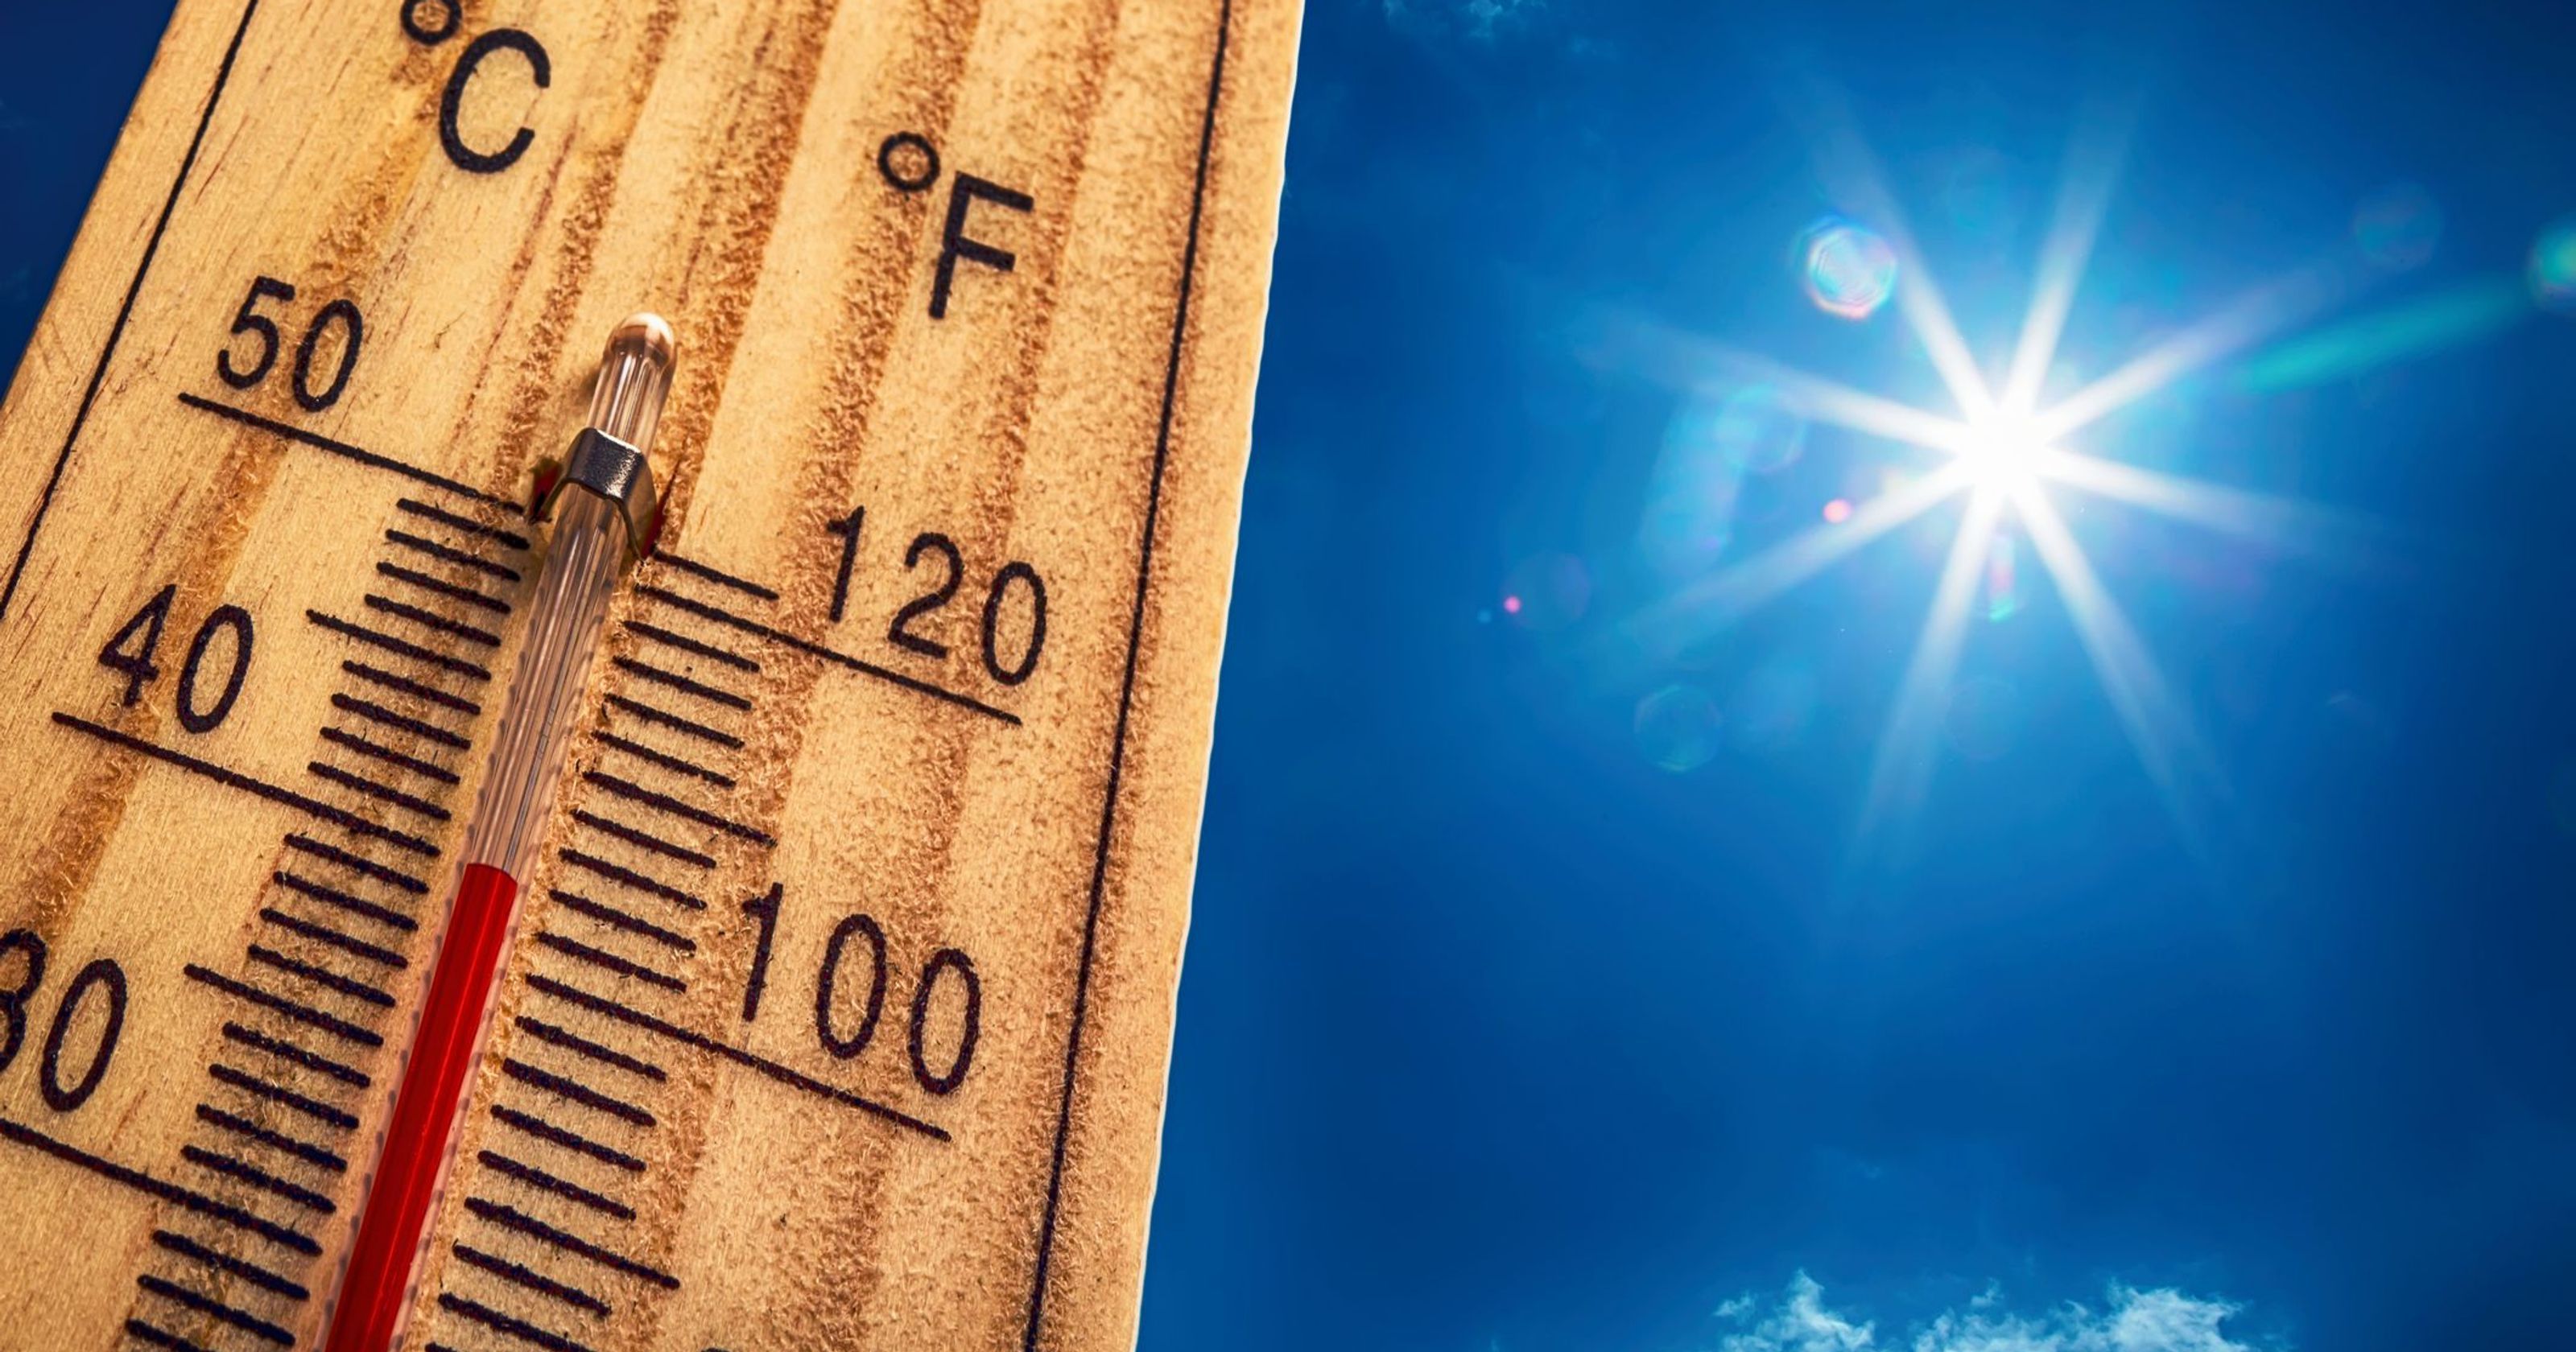 Exams postponed to July due to heat in France